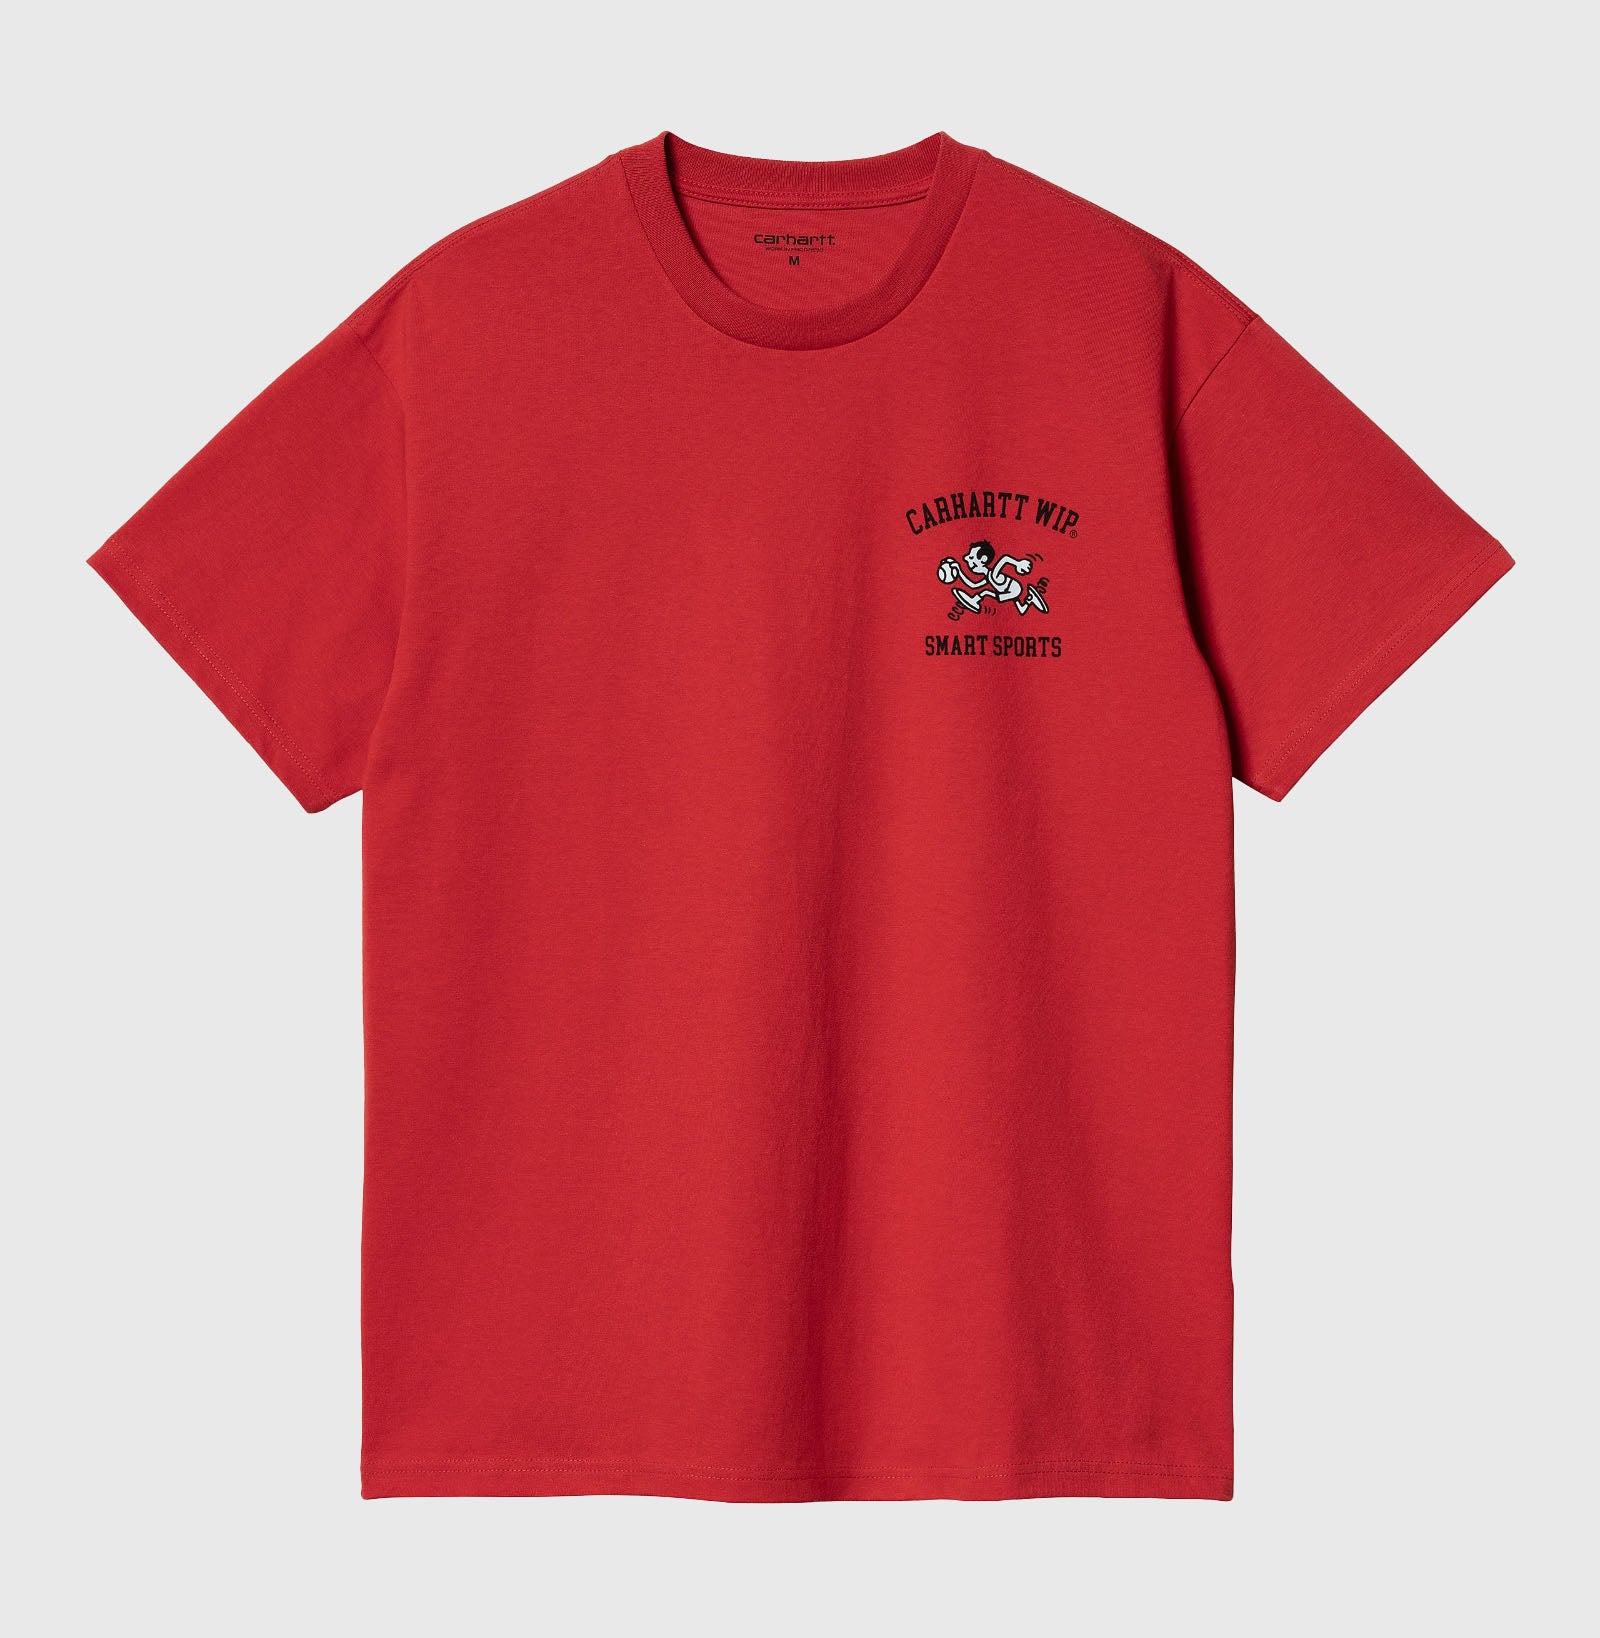 Carhartt WIP T-Shirt S/S Smart Sports Cotone Rosso - 6